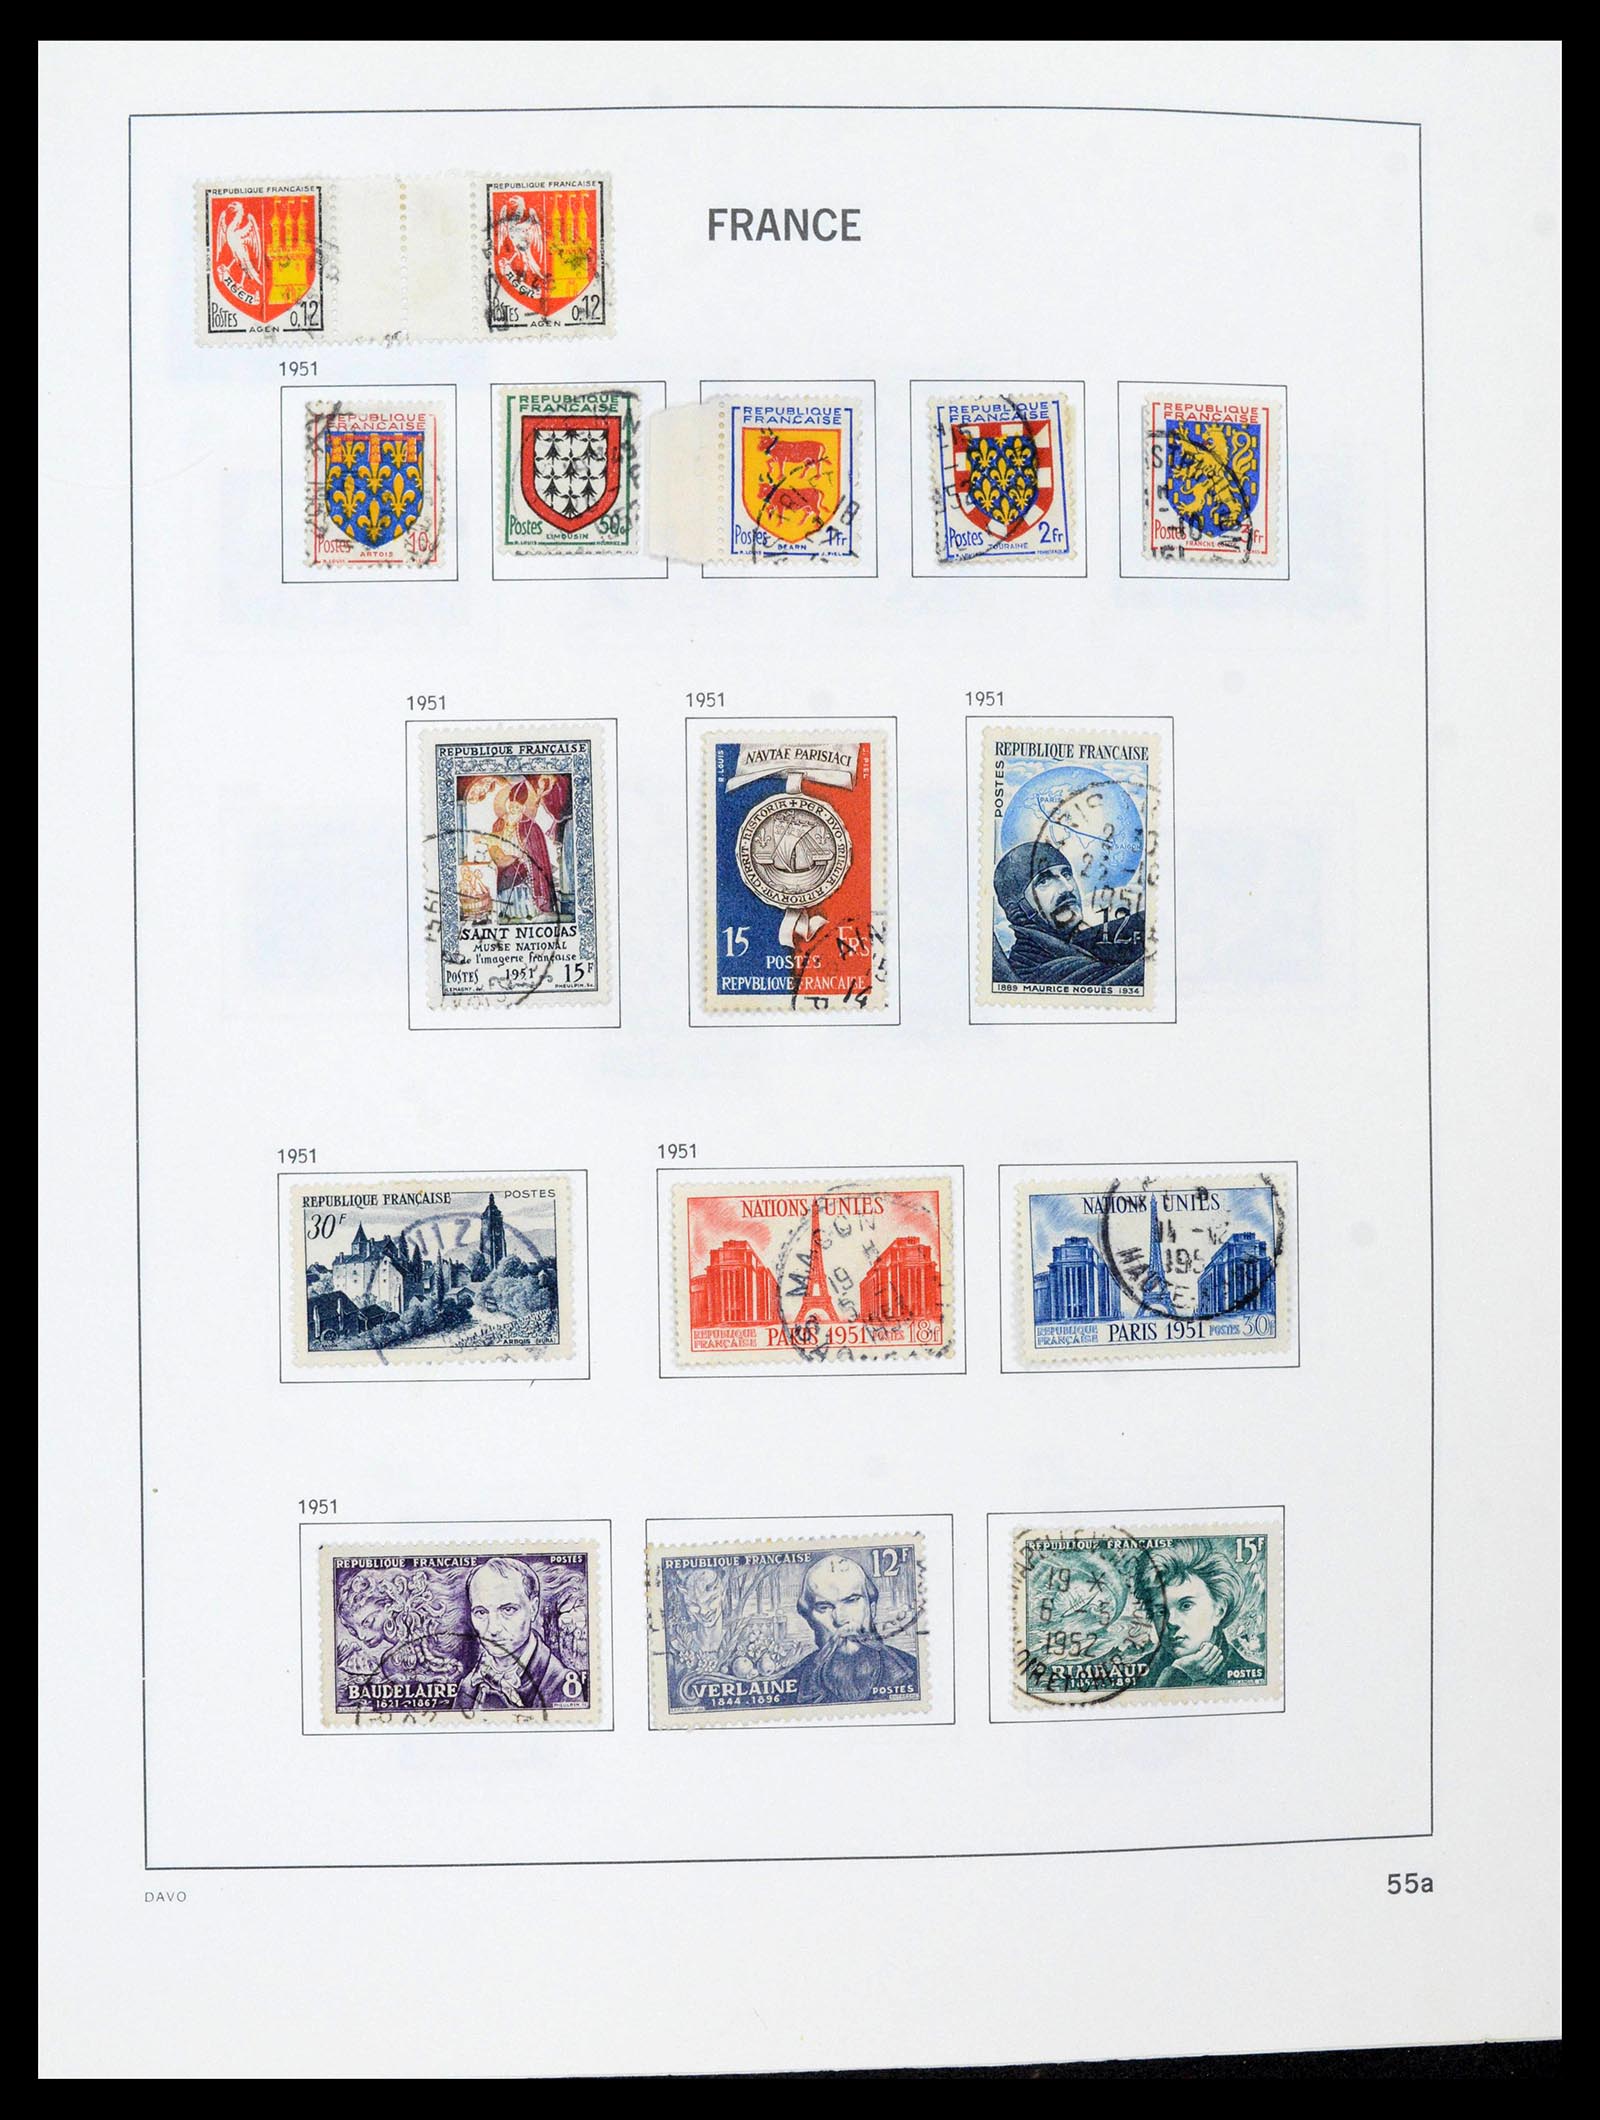 39164 0056 - Stamp collection 39164 France 1849-1981.